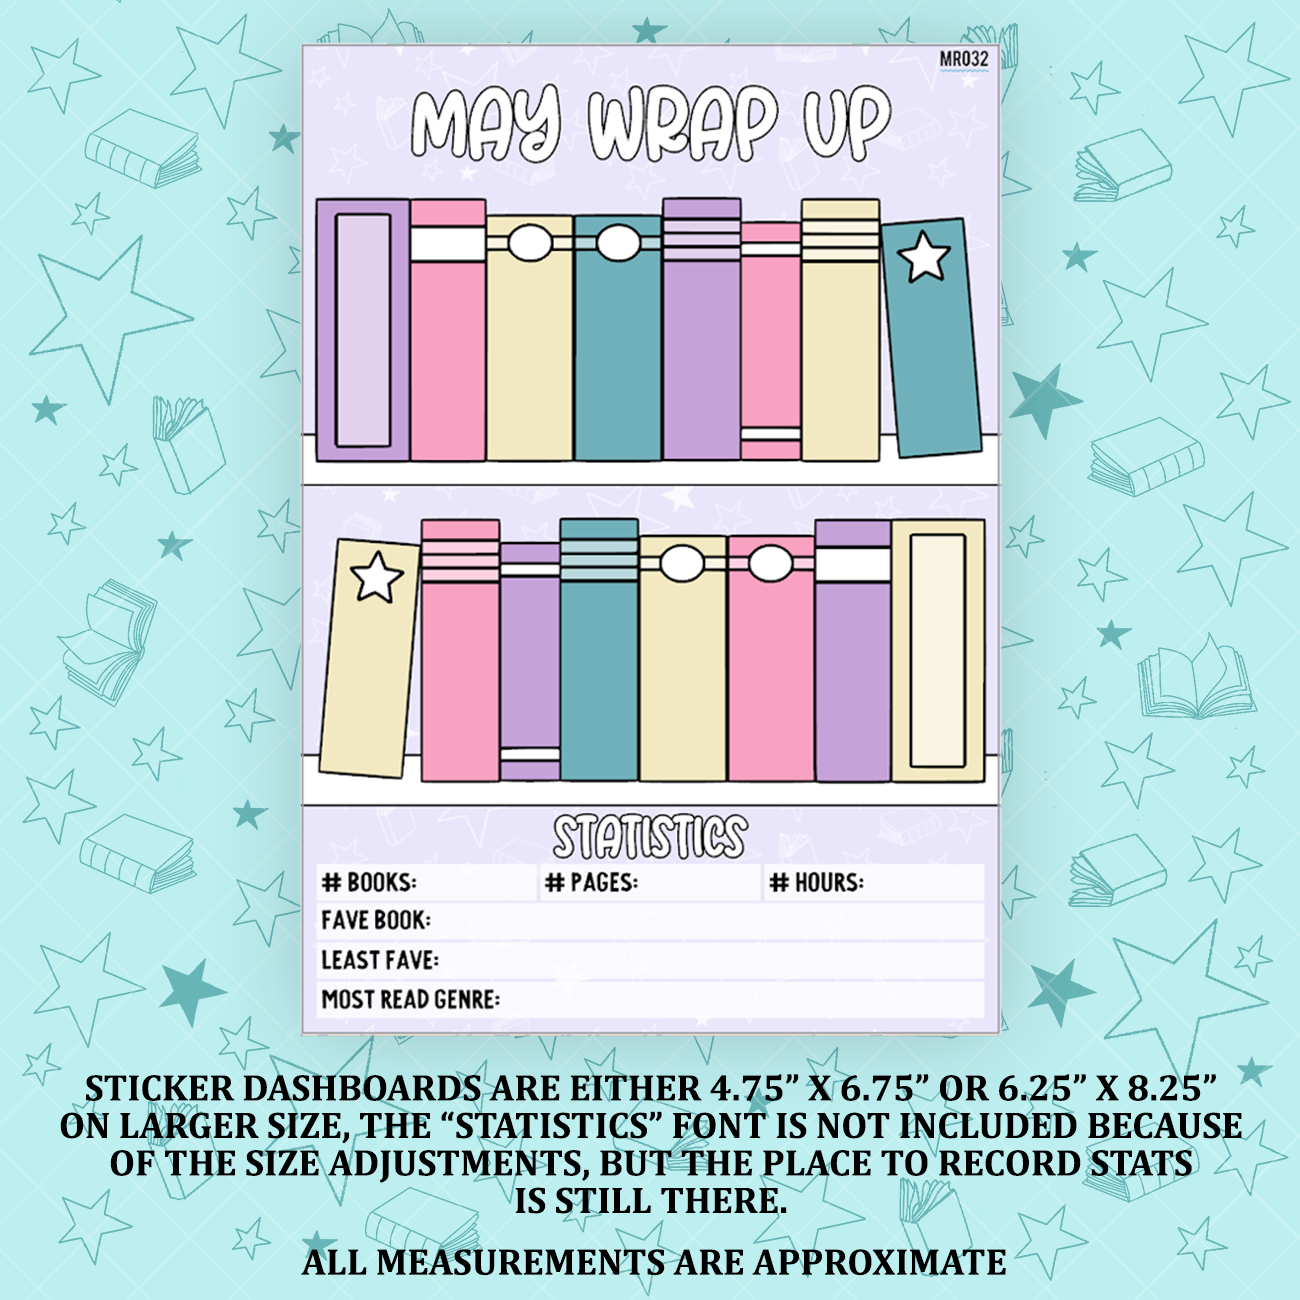 May Reading Wrap Up Sticker Dashboard - MR032